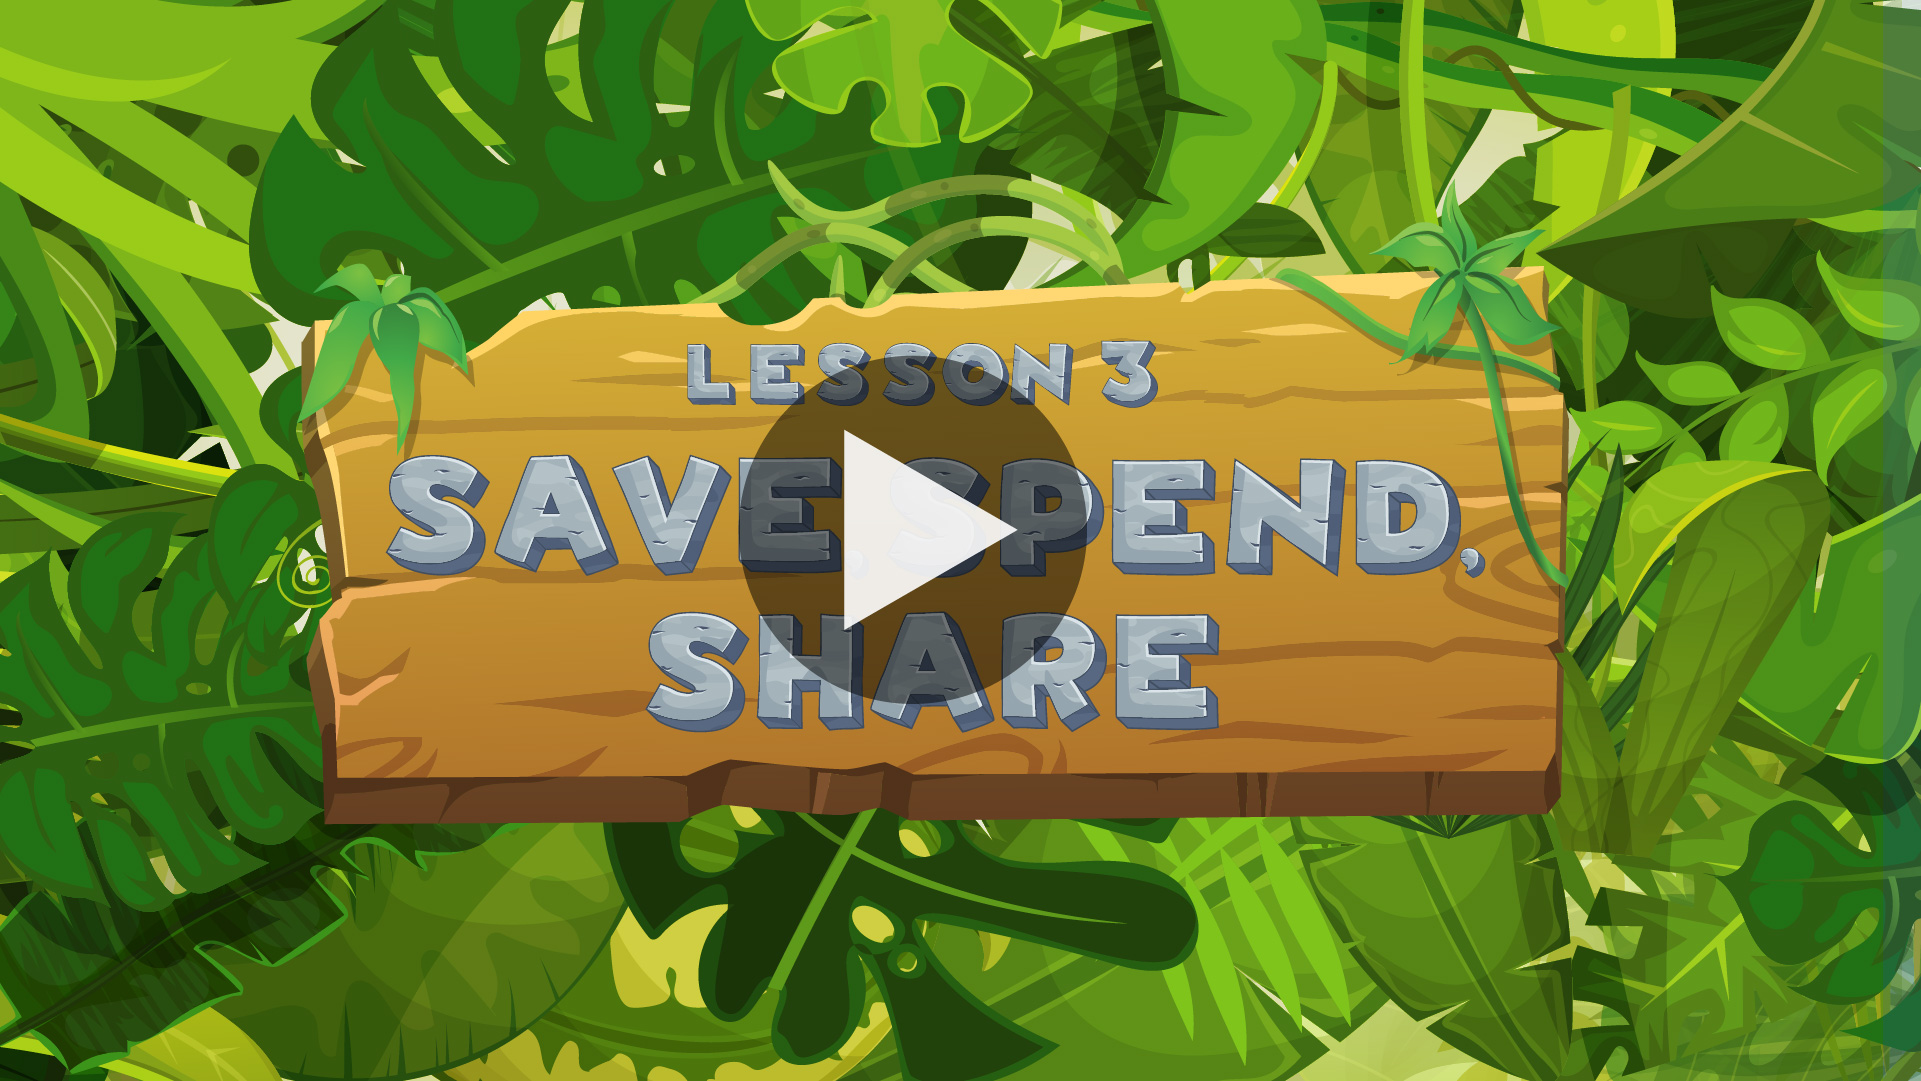 Financial Survival Camp Save, Share, Spend video